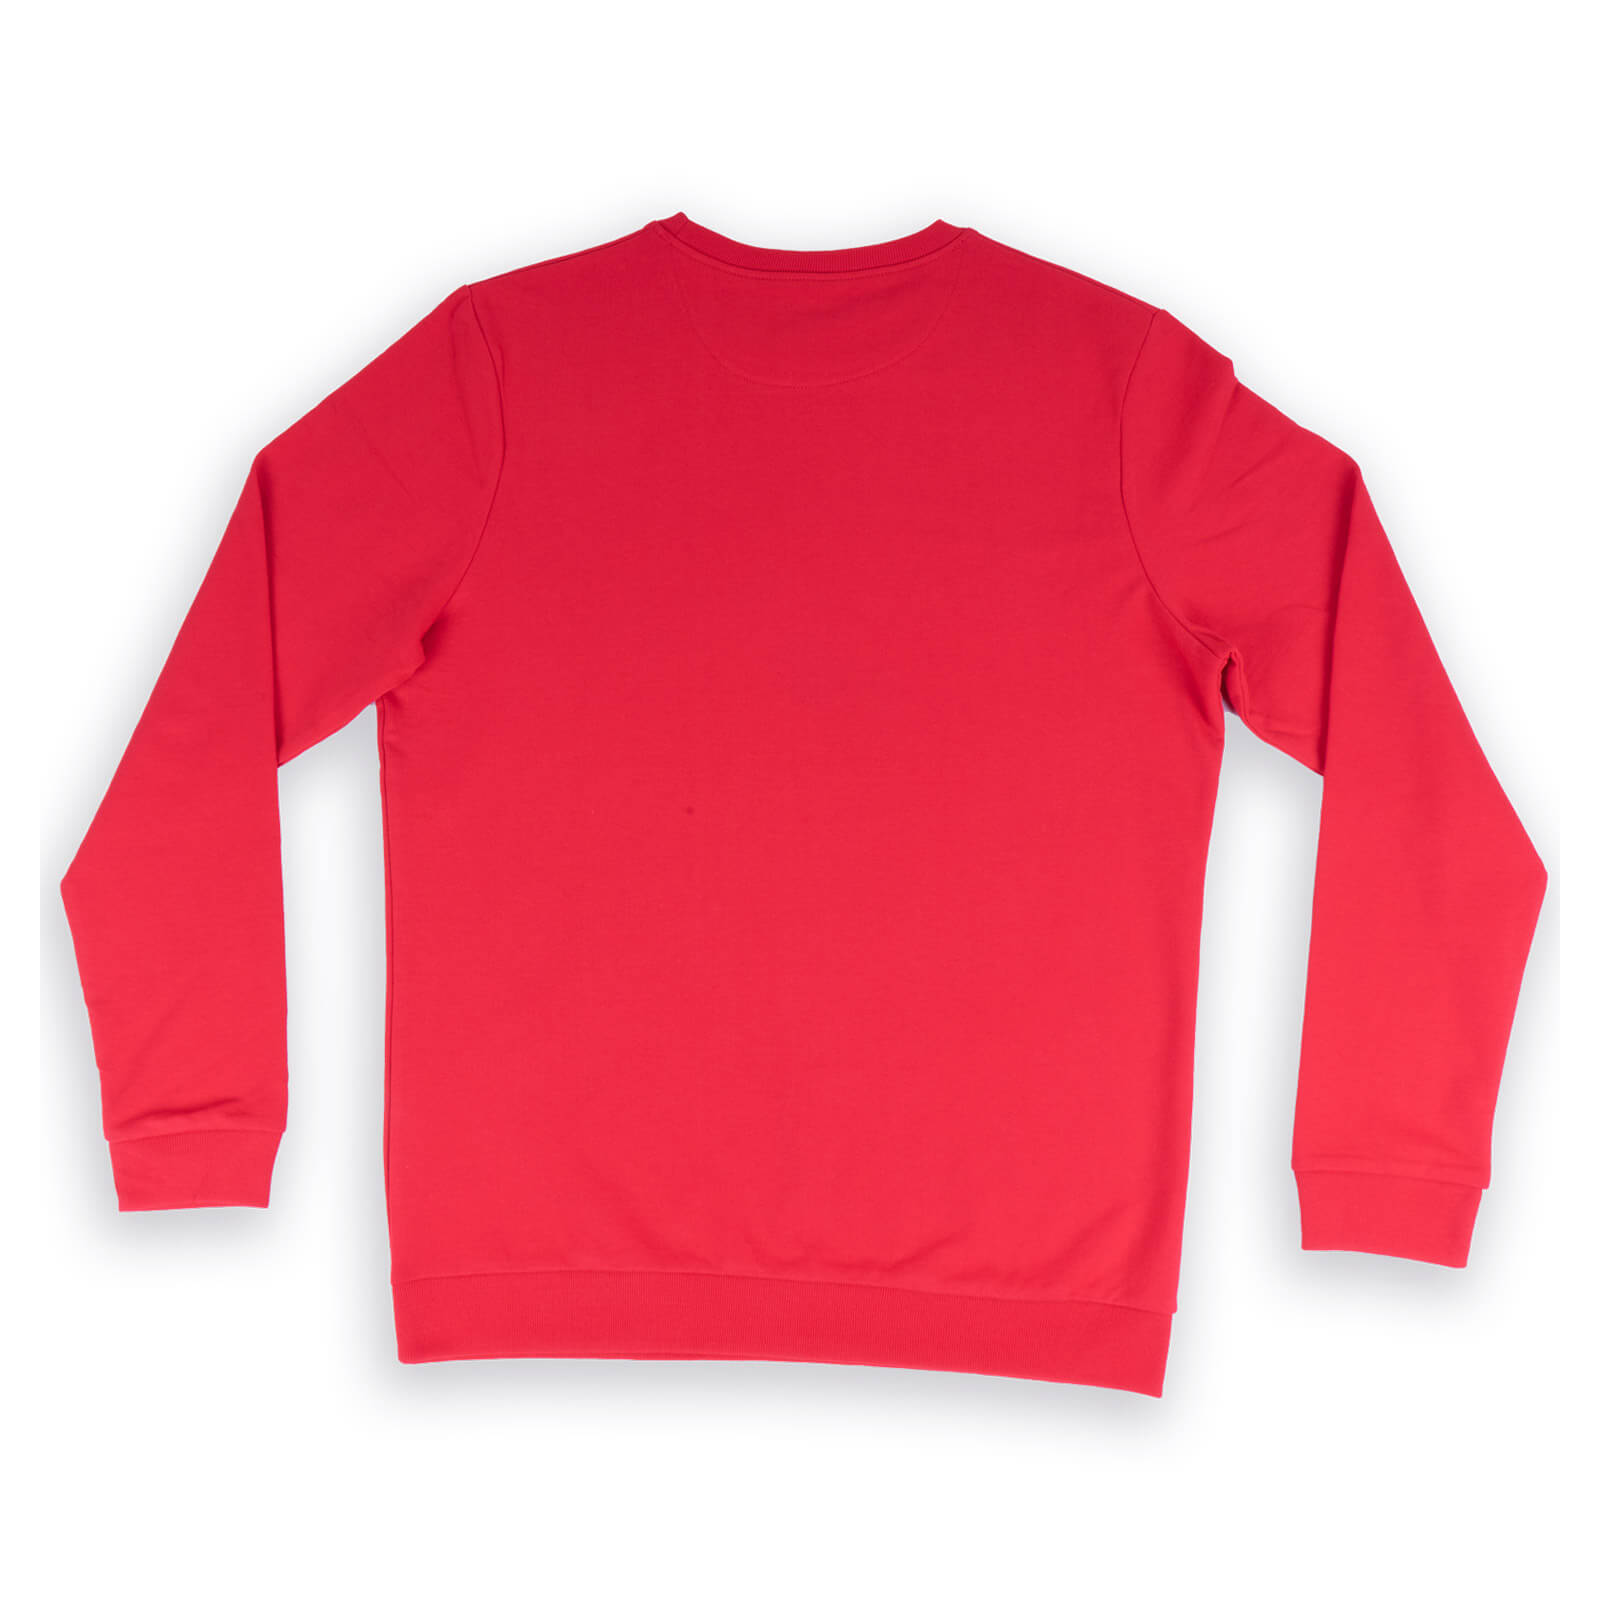 Light sweater, red, 80% cotton, 20% polyester